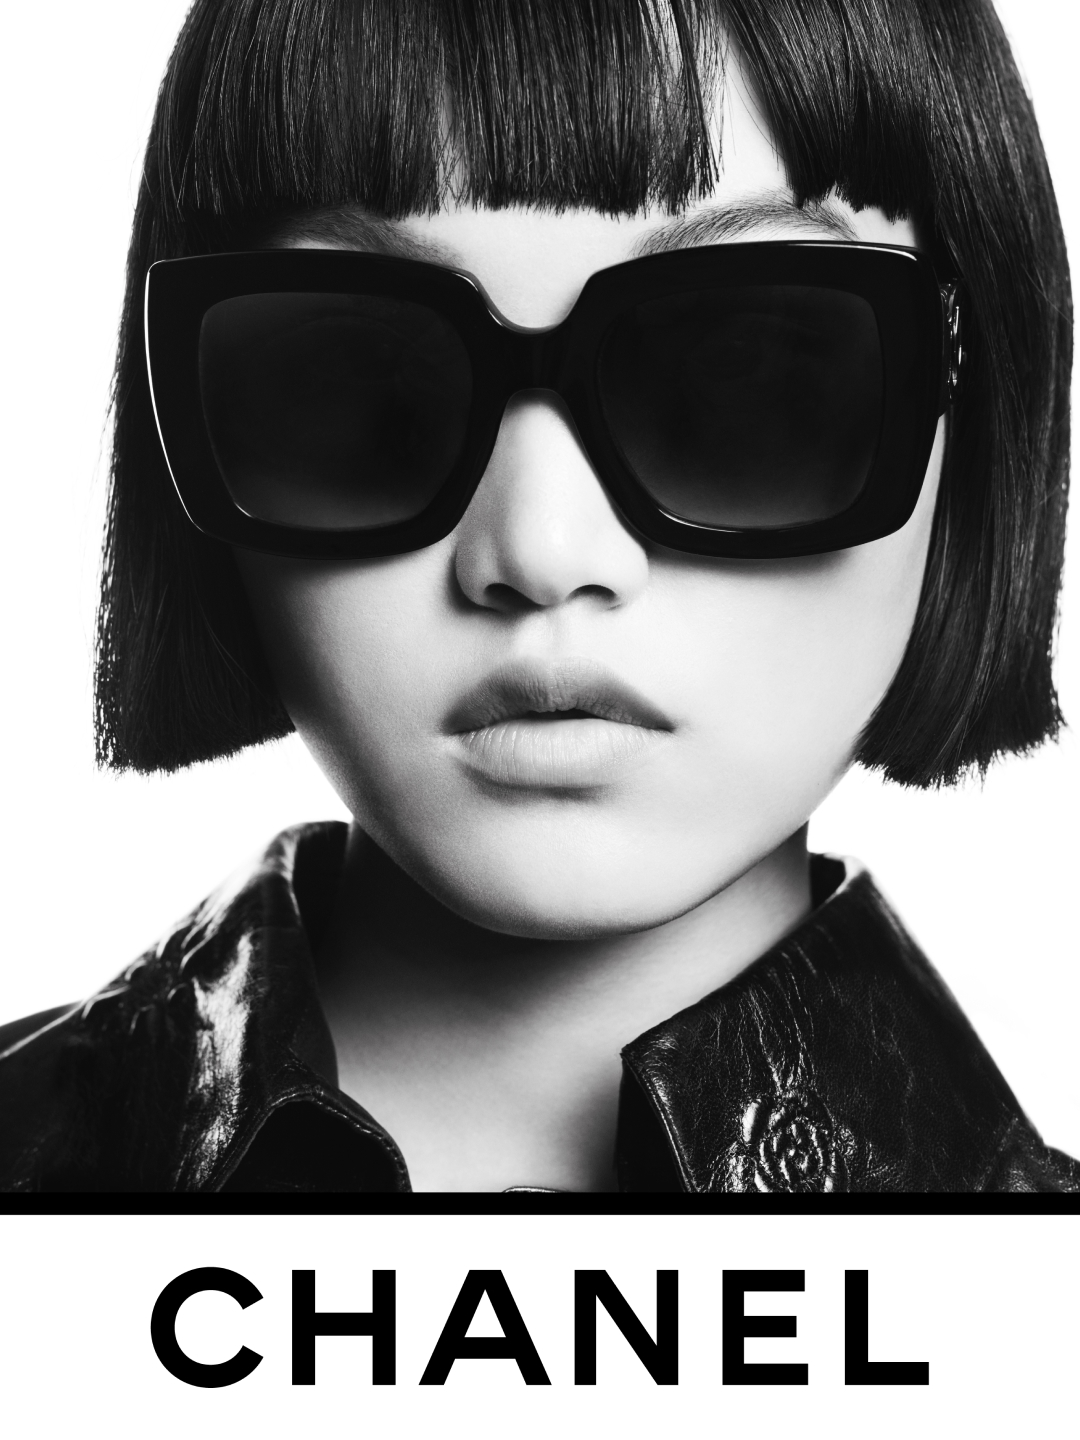 CHANEL on X: Model Pan Haowen sports square-shaped sunglasses in a maxi  format for an assertive femininity. Photographed by Karim Sadli. Glasses  from the CHANEL 2022 eyewear campaign will be available in